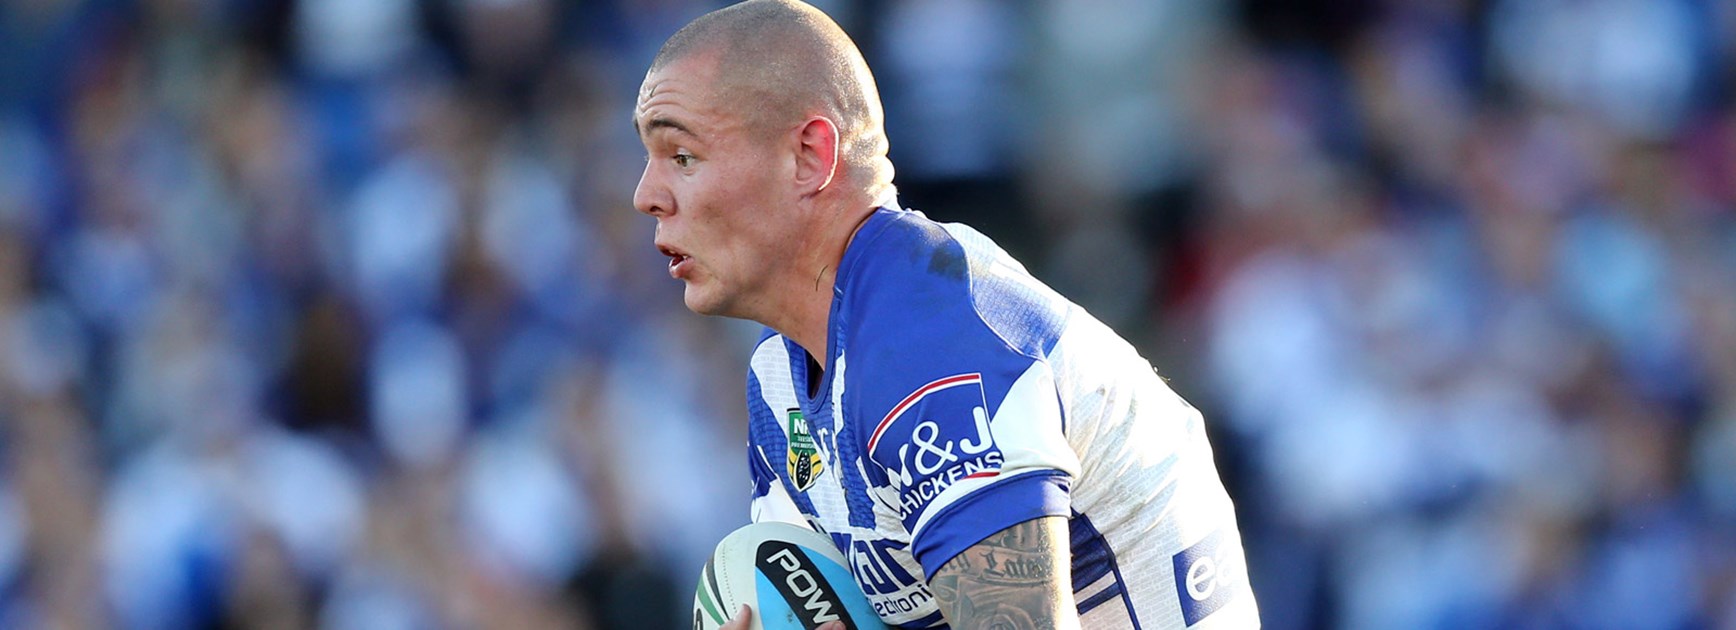 Bulldogs prop David Klemmer was immense for his side yet again against the Broncos.